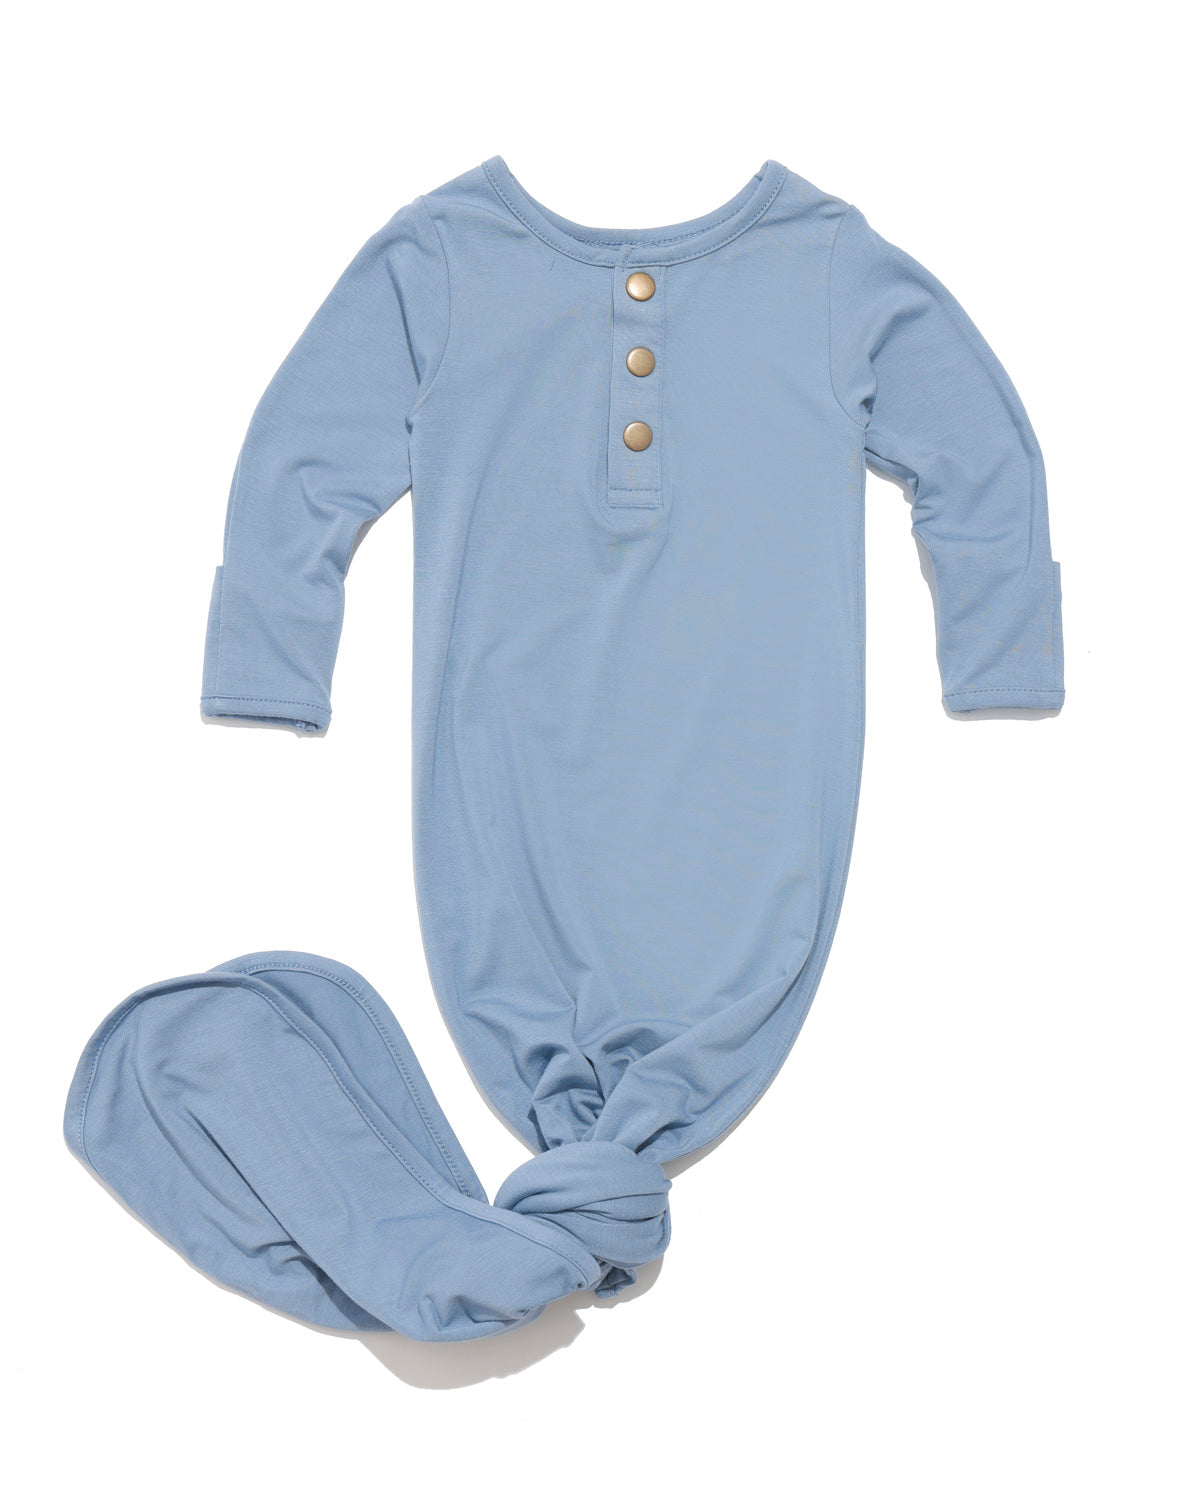 Buy HOUSE OF PAAVAY Super Soft Cotton Zipless Cotton Feedin  Loungewear/Maternity and Postpartum Feeding Wear/Stretchable and Soft.  (Xs-Calf Length_Purple) at